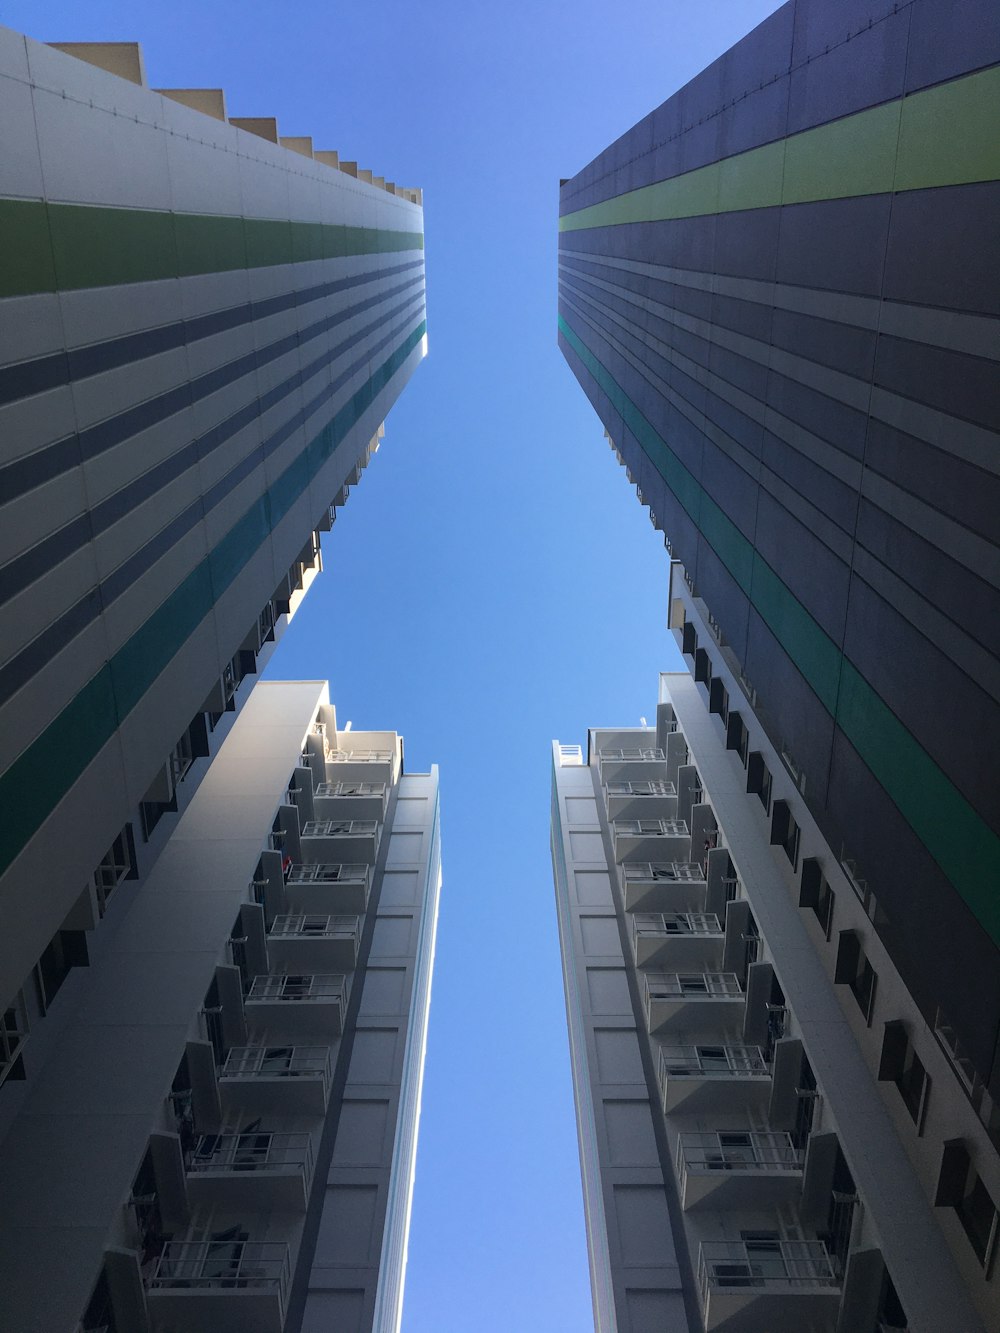 looking up at two tall buildings with balconies